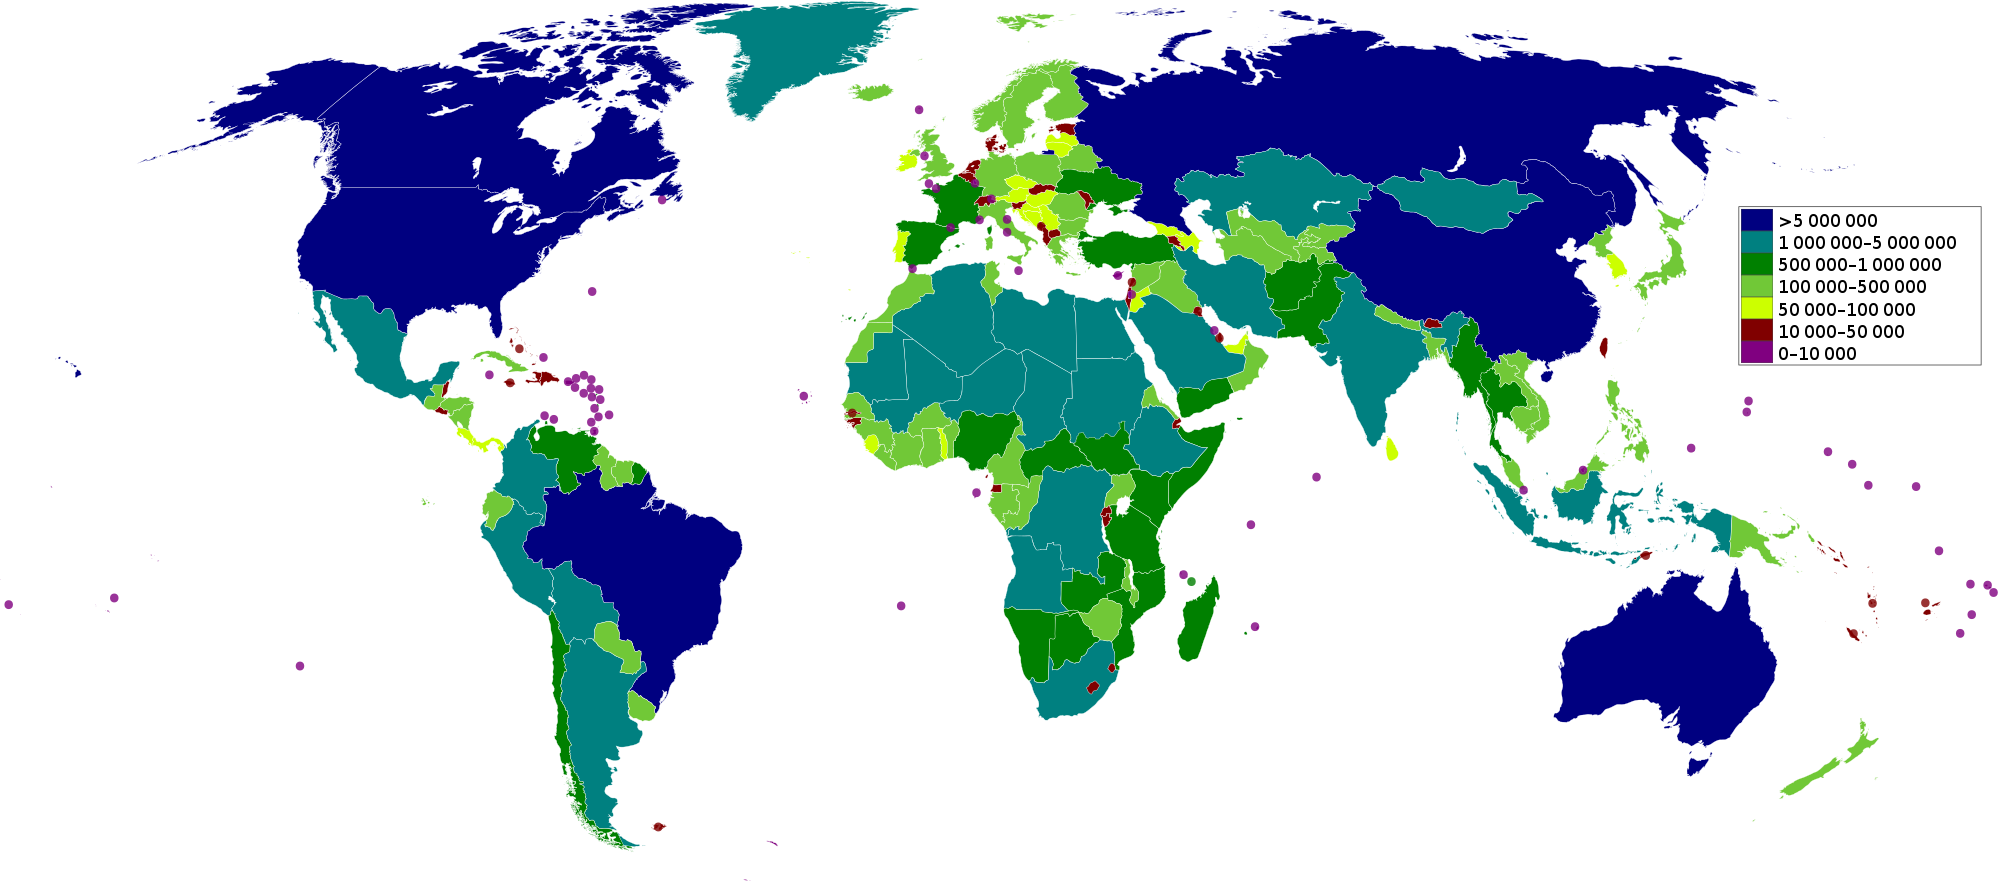 World map, except Antarctica, colour-coded by areas of countries in square kilometres.